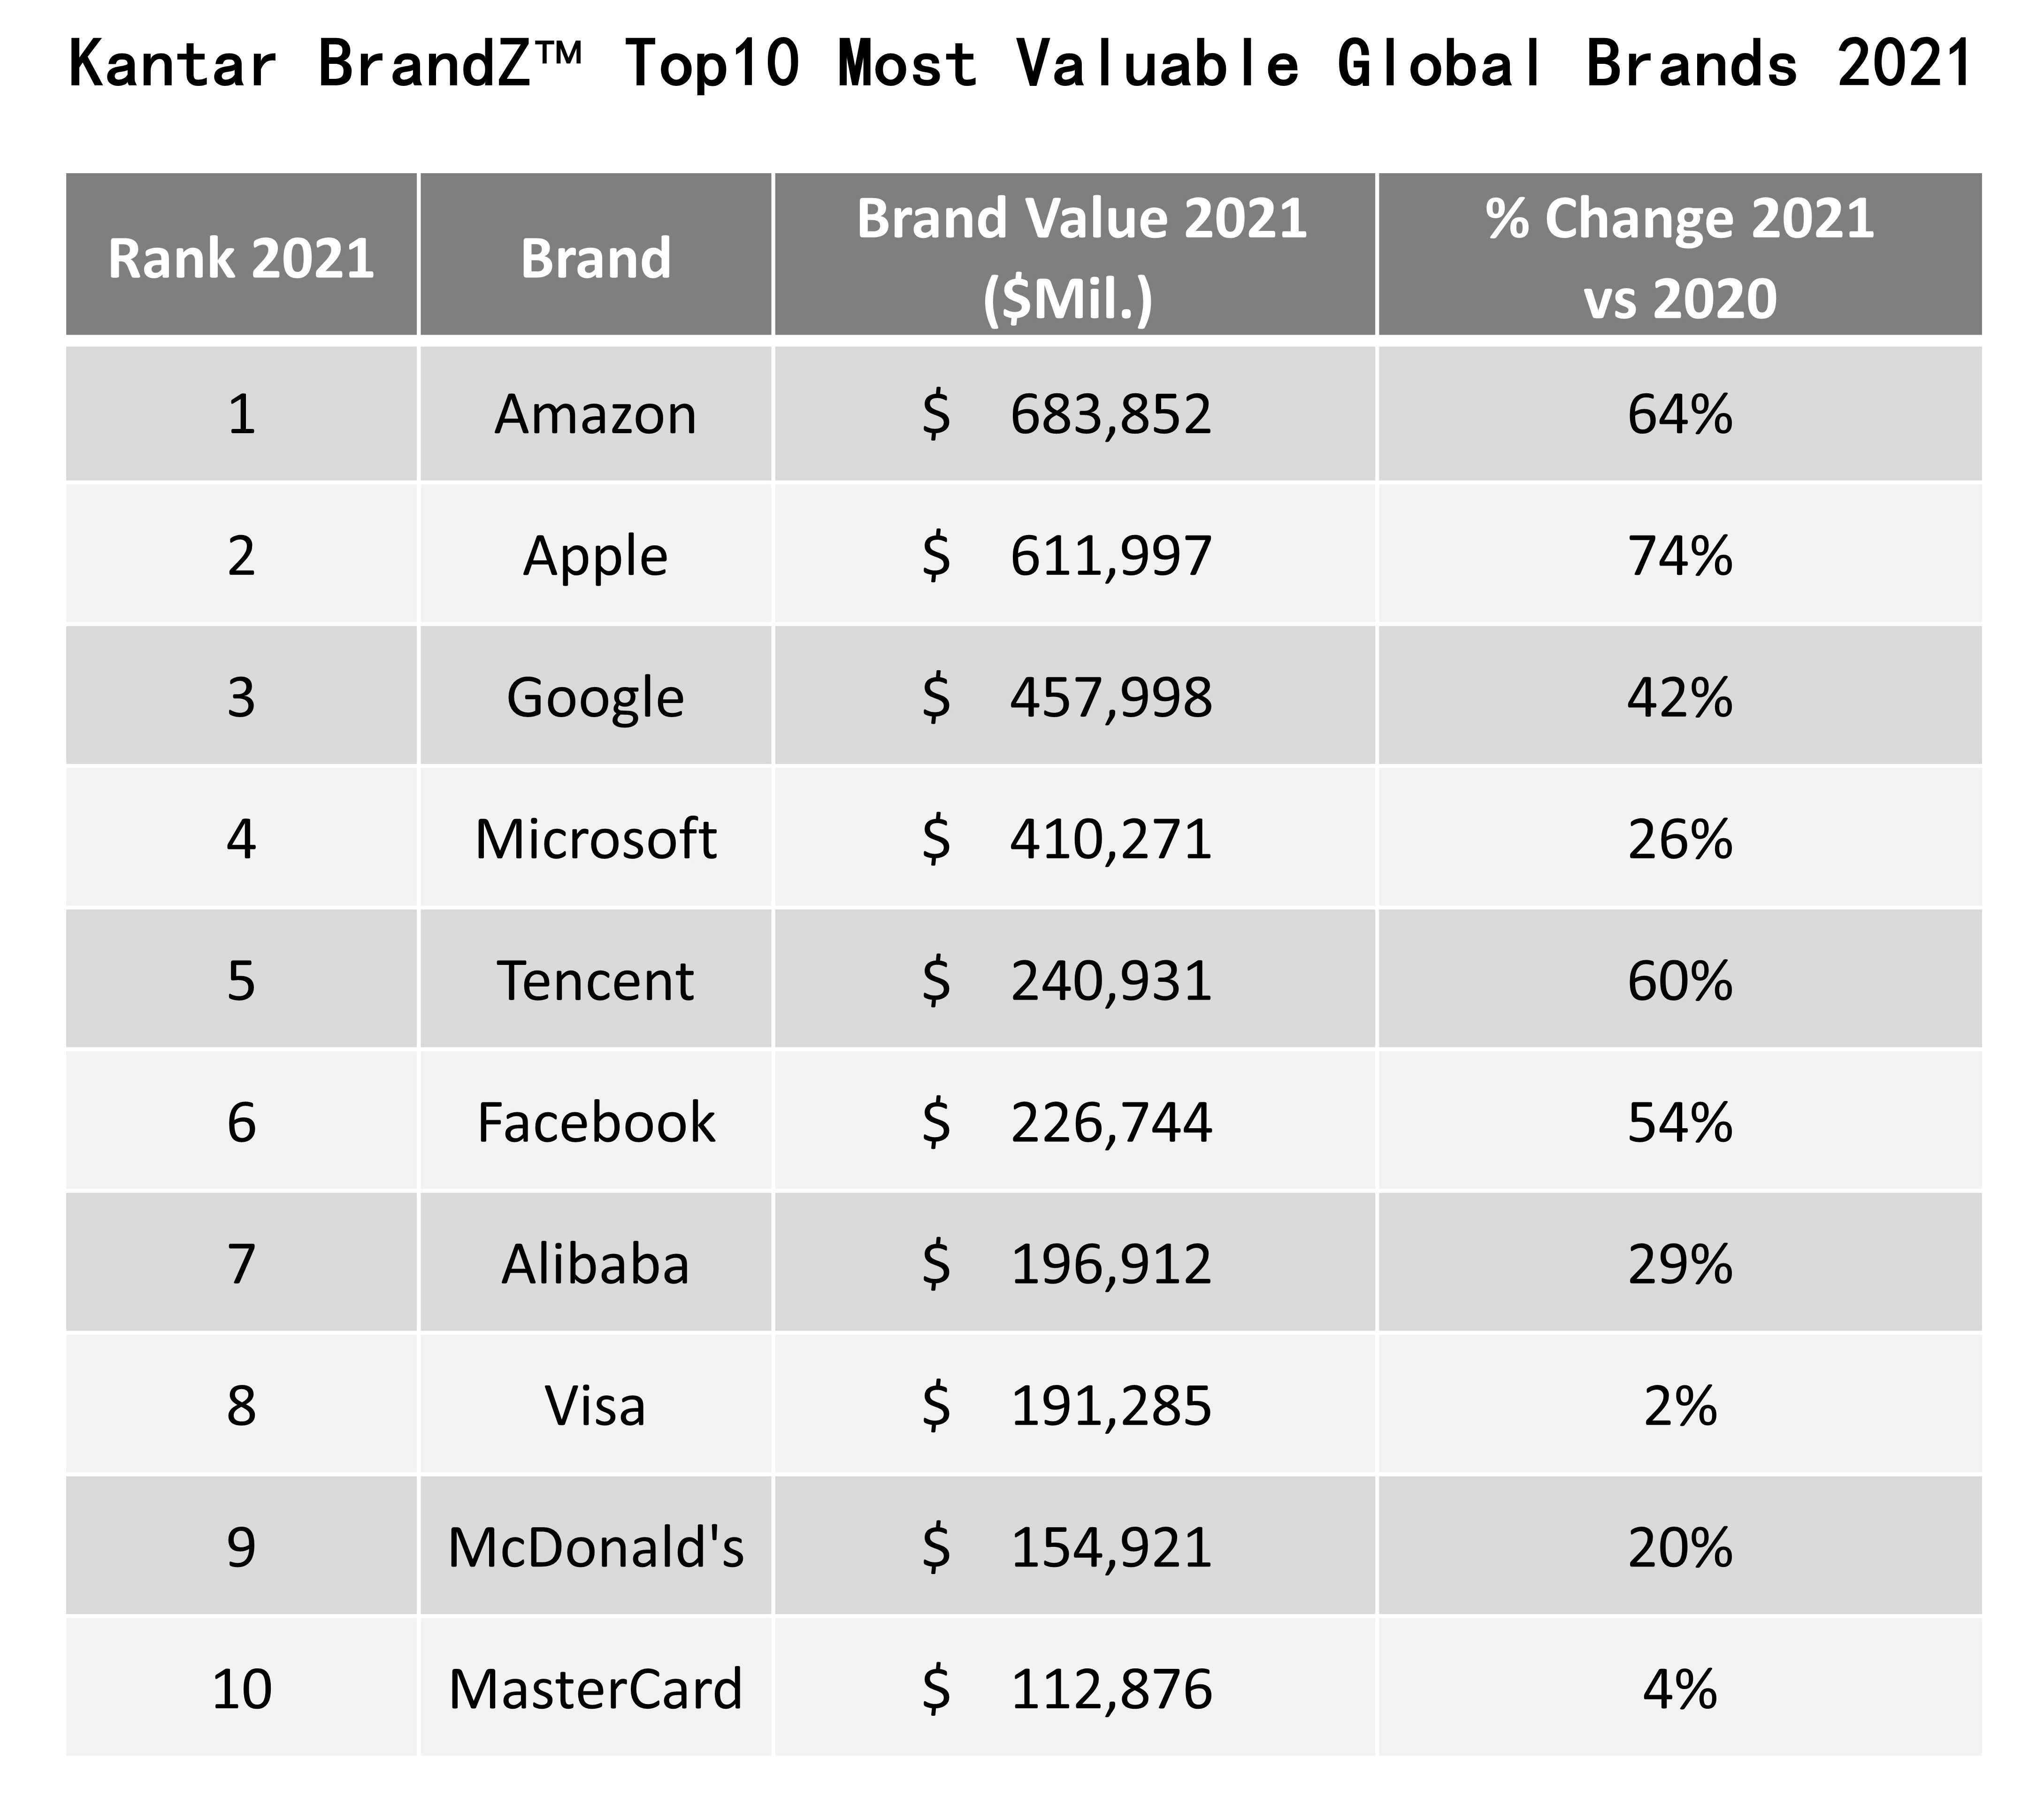 World's top 10 most valuable luxury brands in 2021